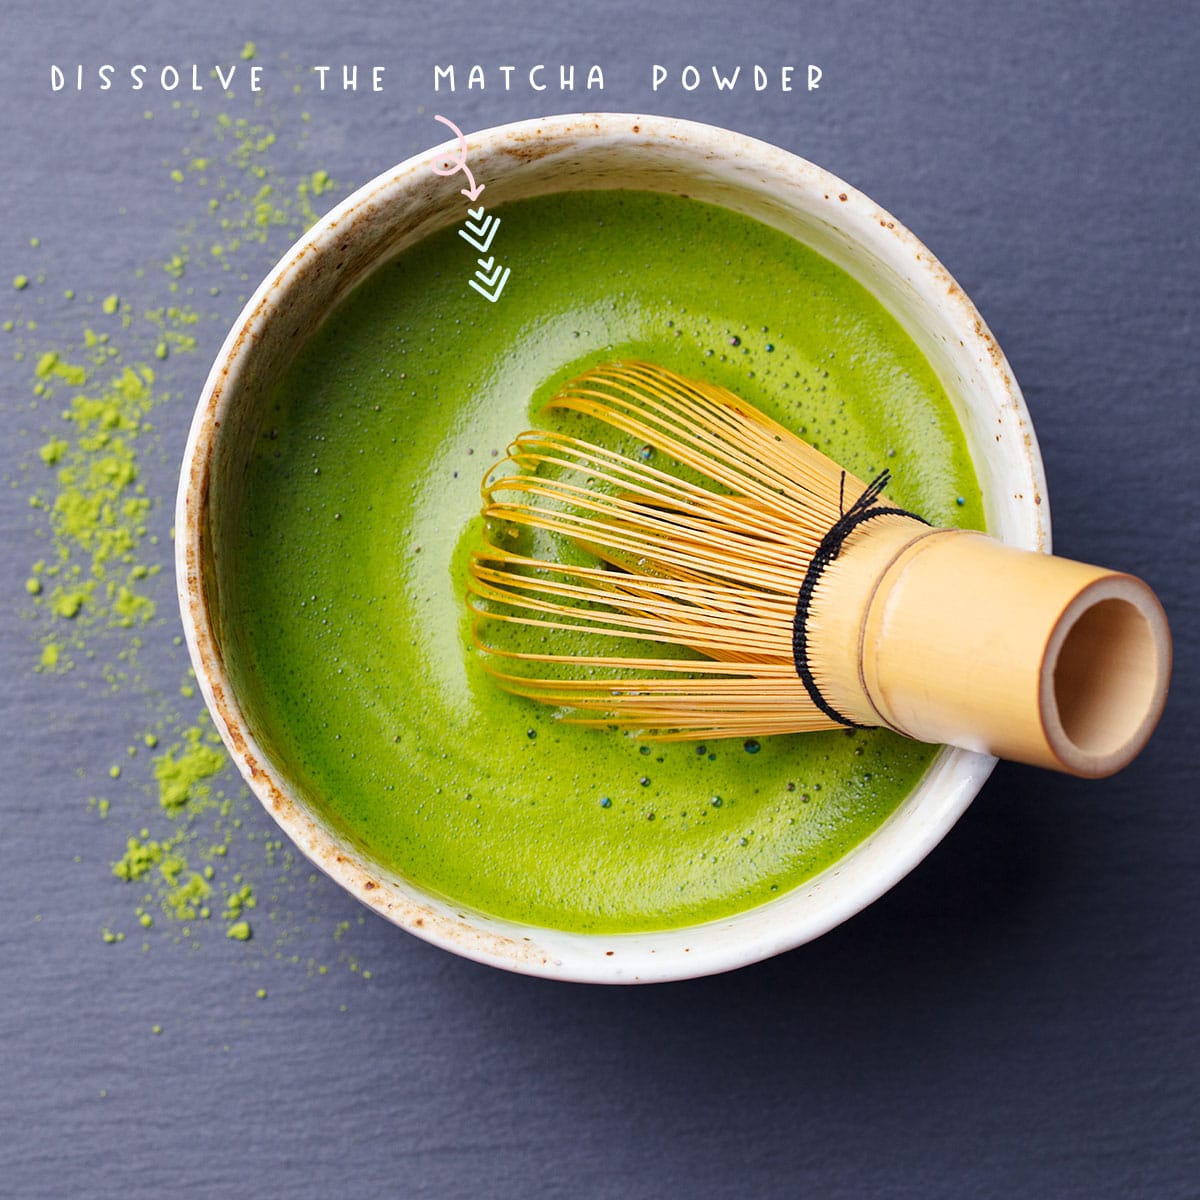 Put some matcha powder in a small bowl, and stir in some hot water (170°F/70°C, not boiling water) to make a thin paste. Whisk using a matcha whisker until it dissolves into a smooth paste.